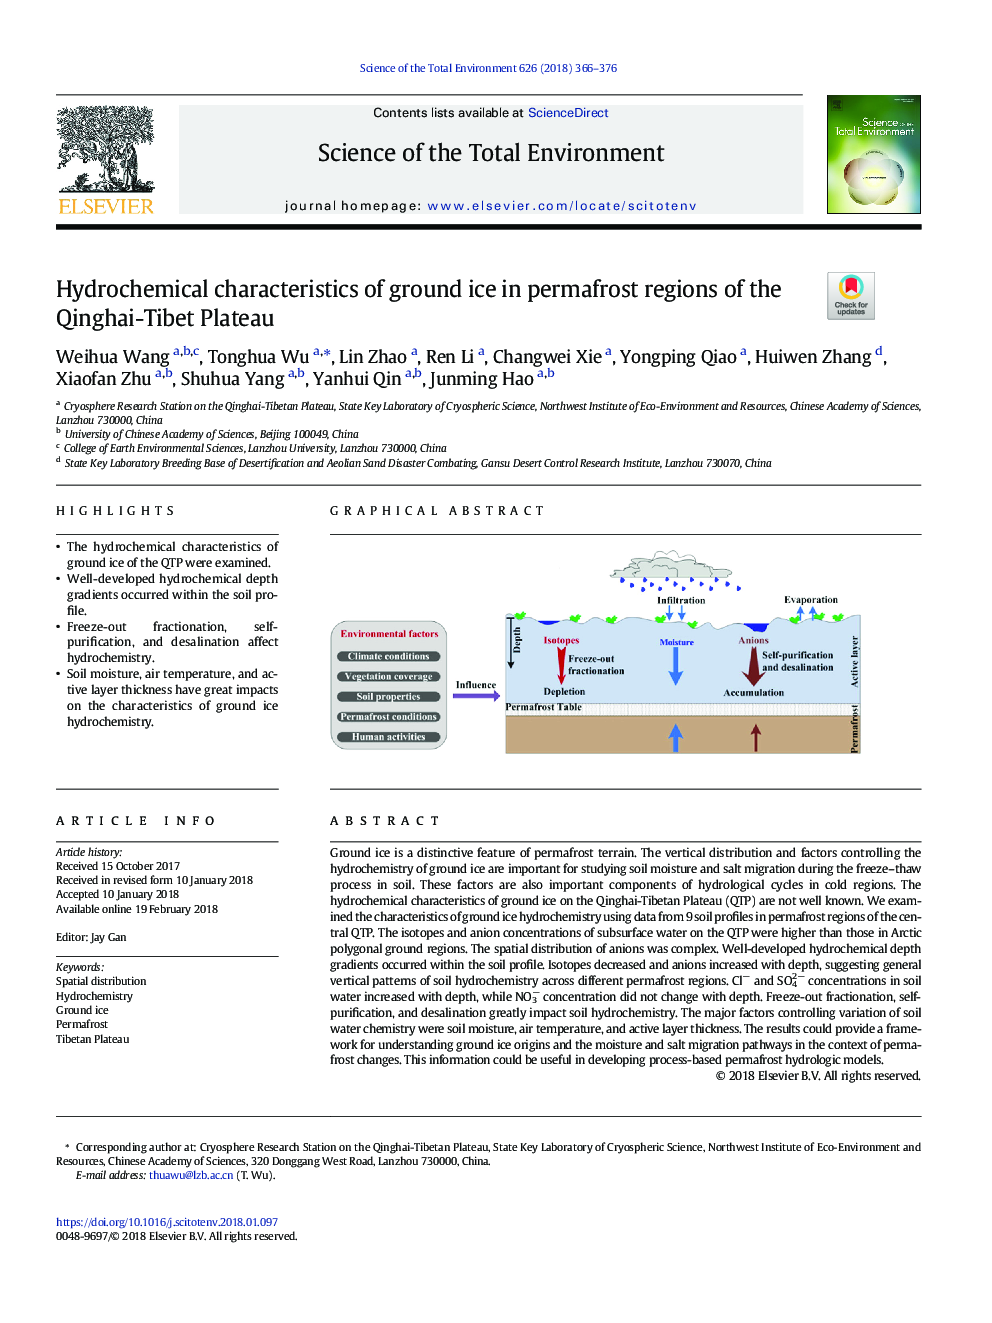 Hydrochemical characteristics of ground ice in permafrost regions of the Qinghai-Tibet Plateau